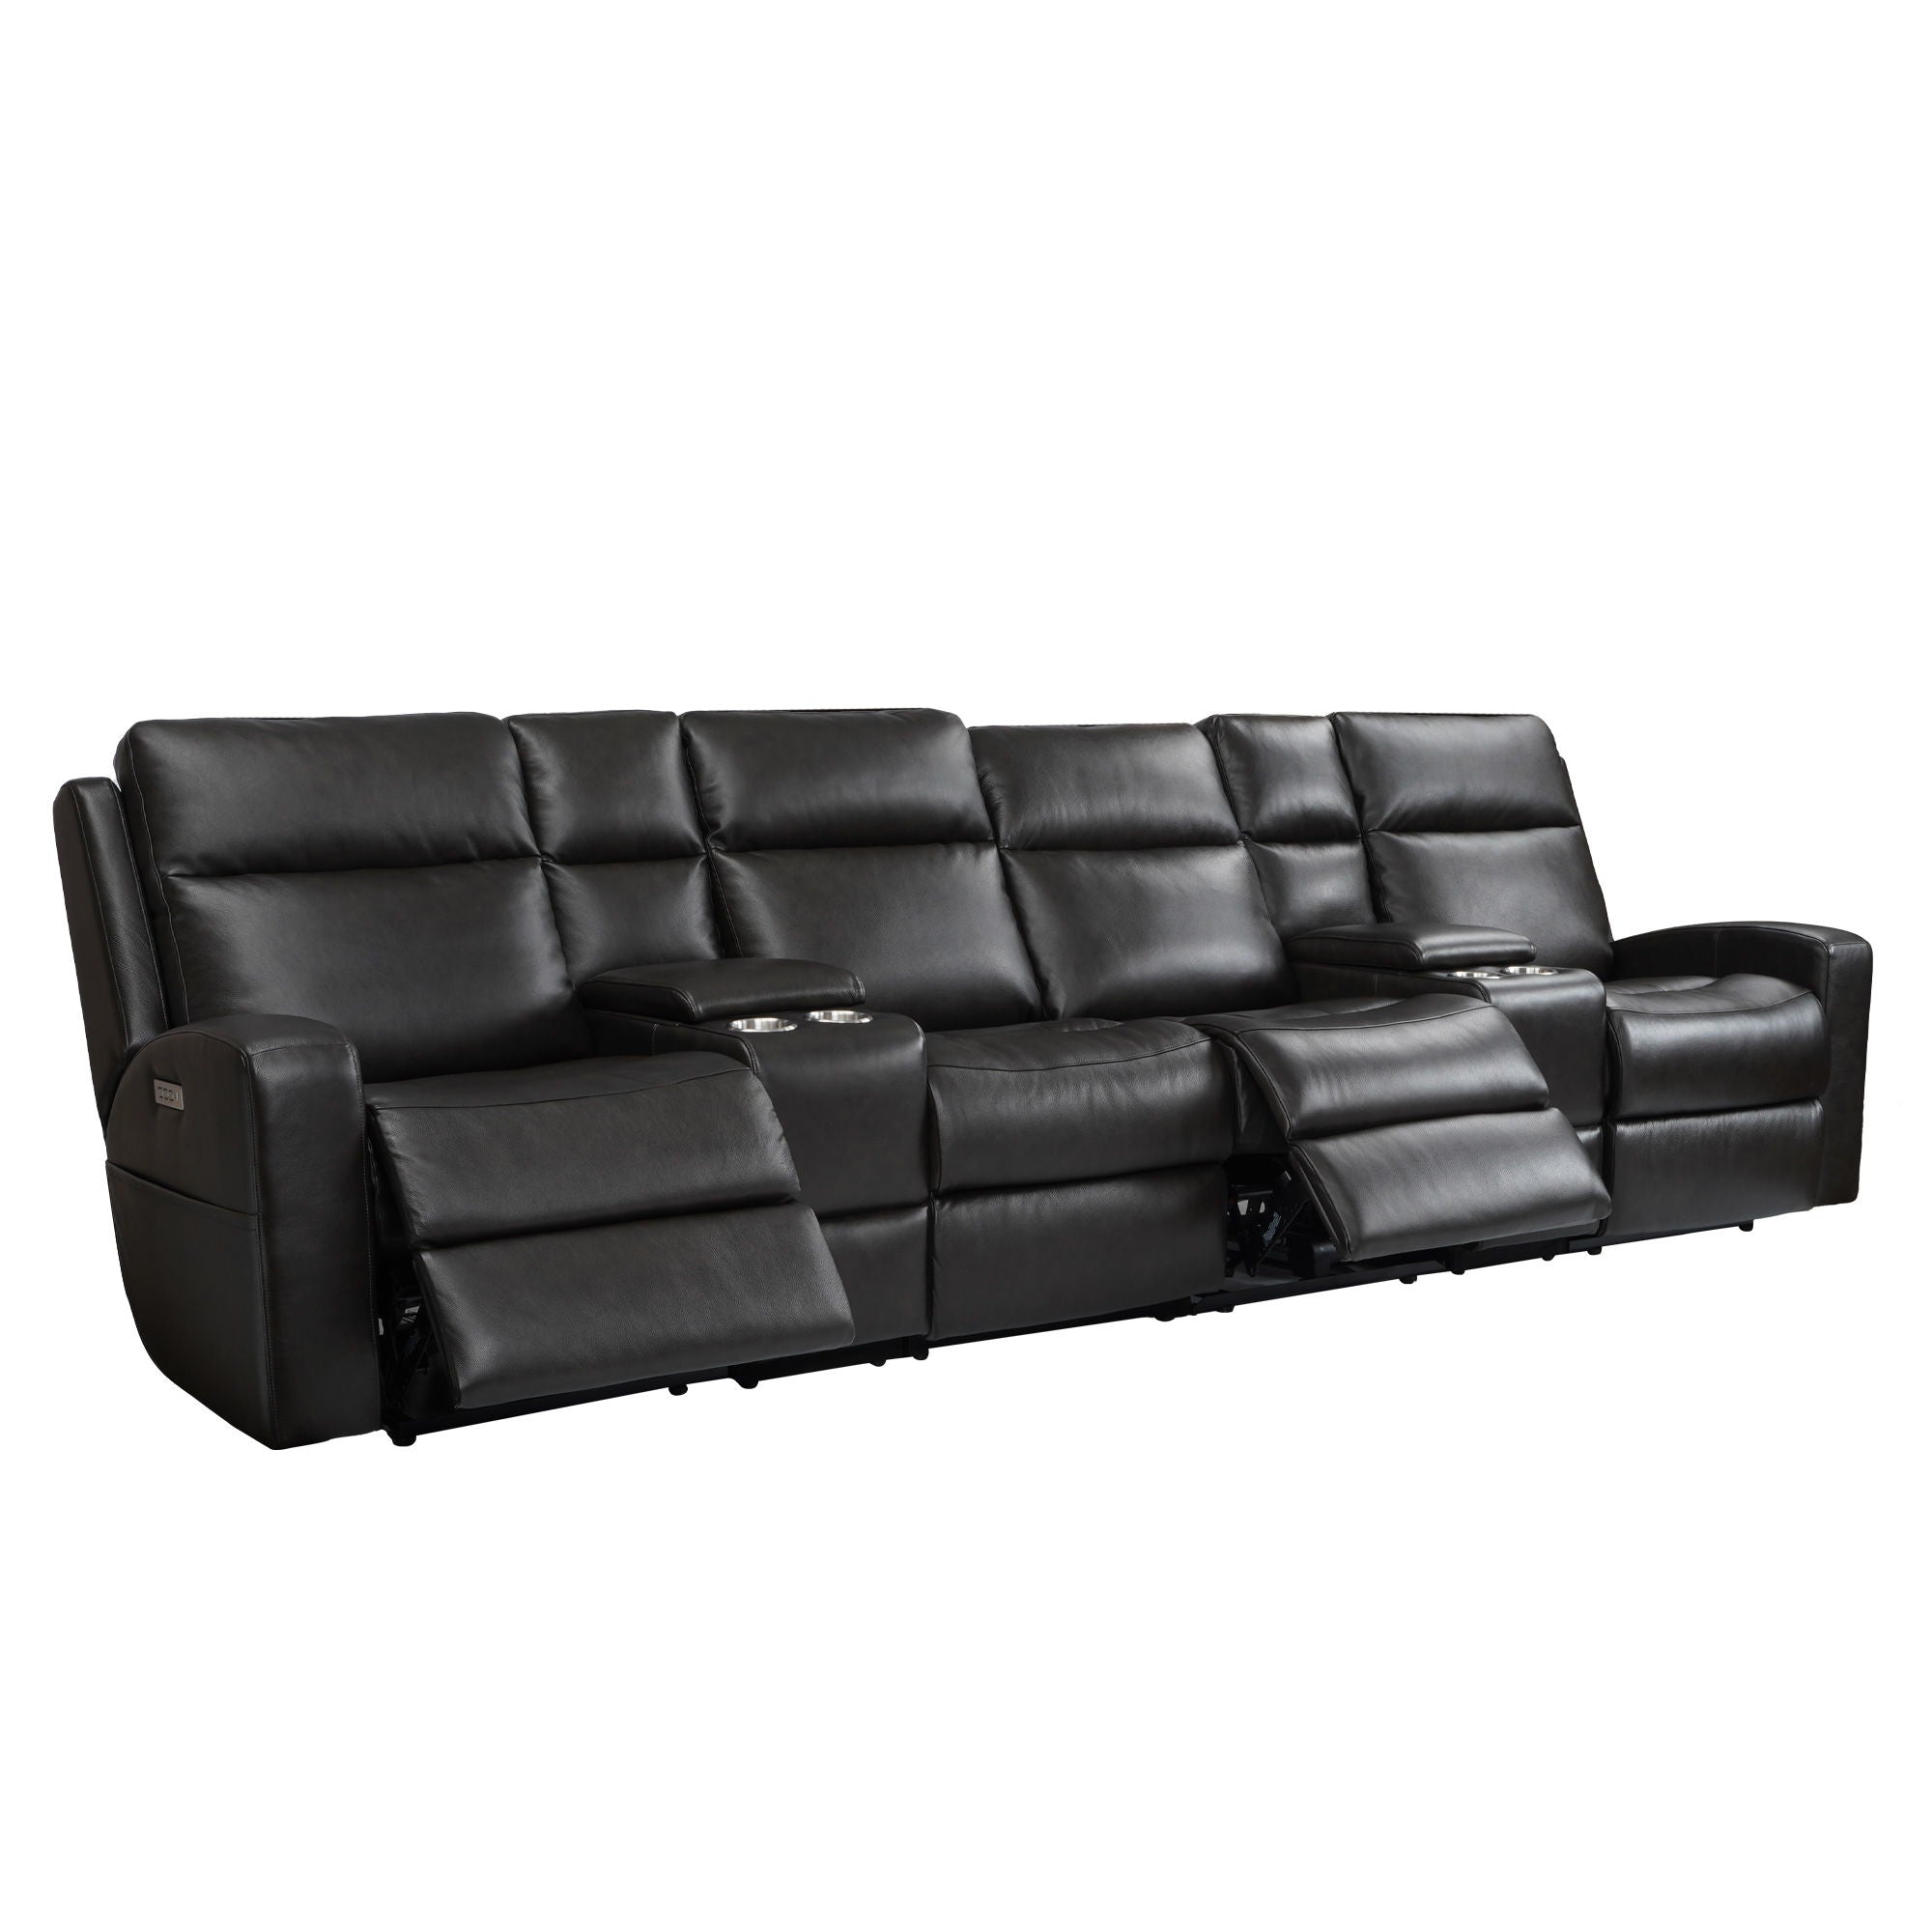 Caleb Triple Power 4 Seats Sofa With 2 Console, Top Grain Leather, Lumbar Support, Adjustable Headrest, Storage Side Pocket, USB & Type C Charger Port, All Seats With Power